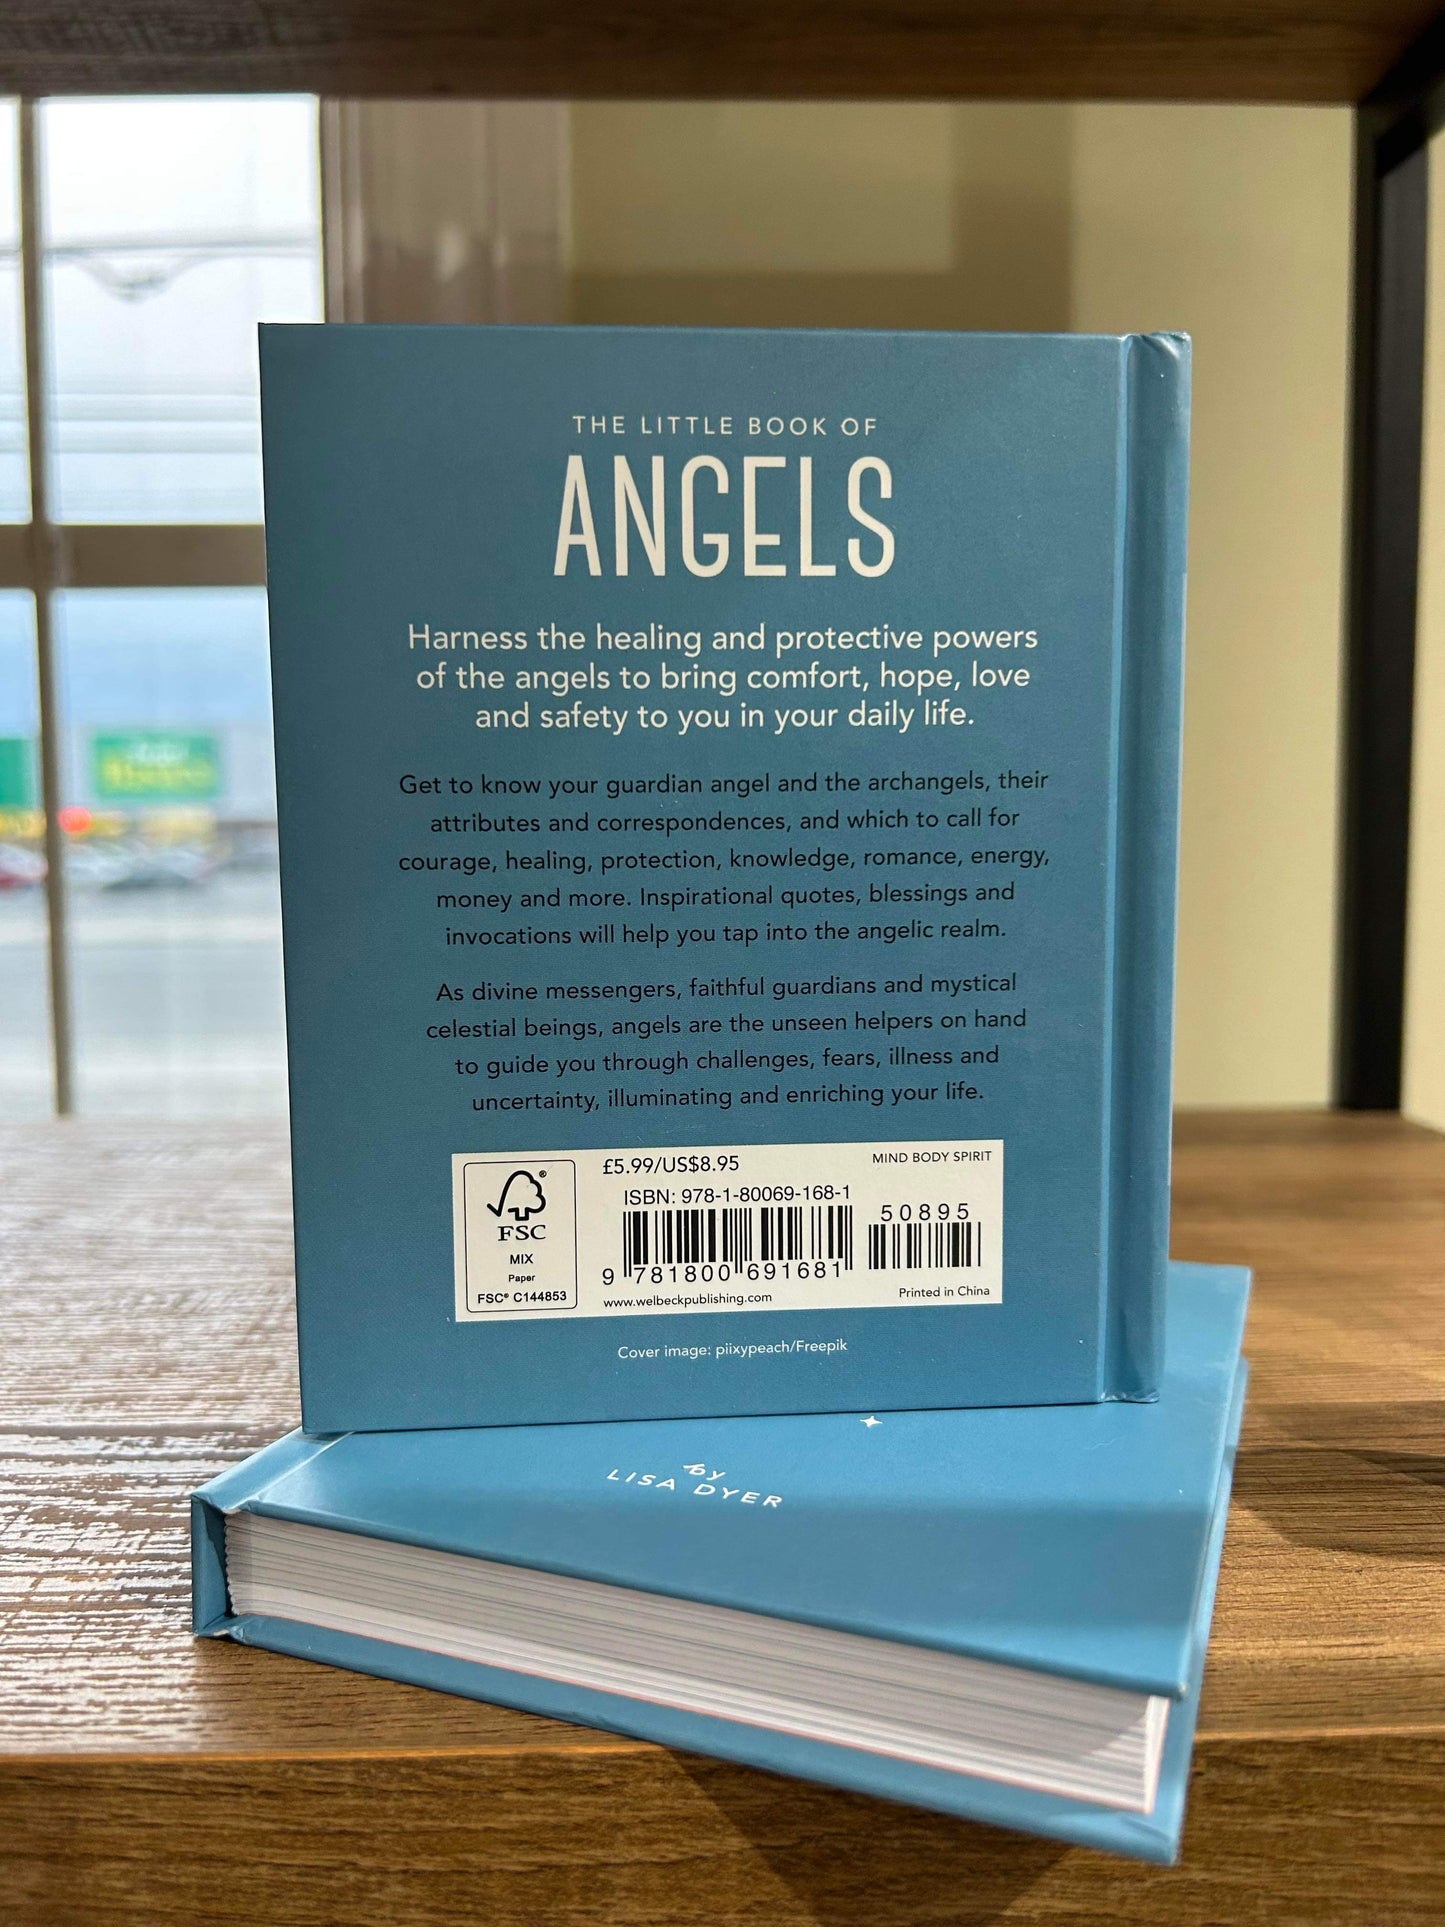 The Little Book of Angels by Lisa Dyer